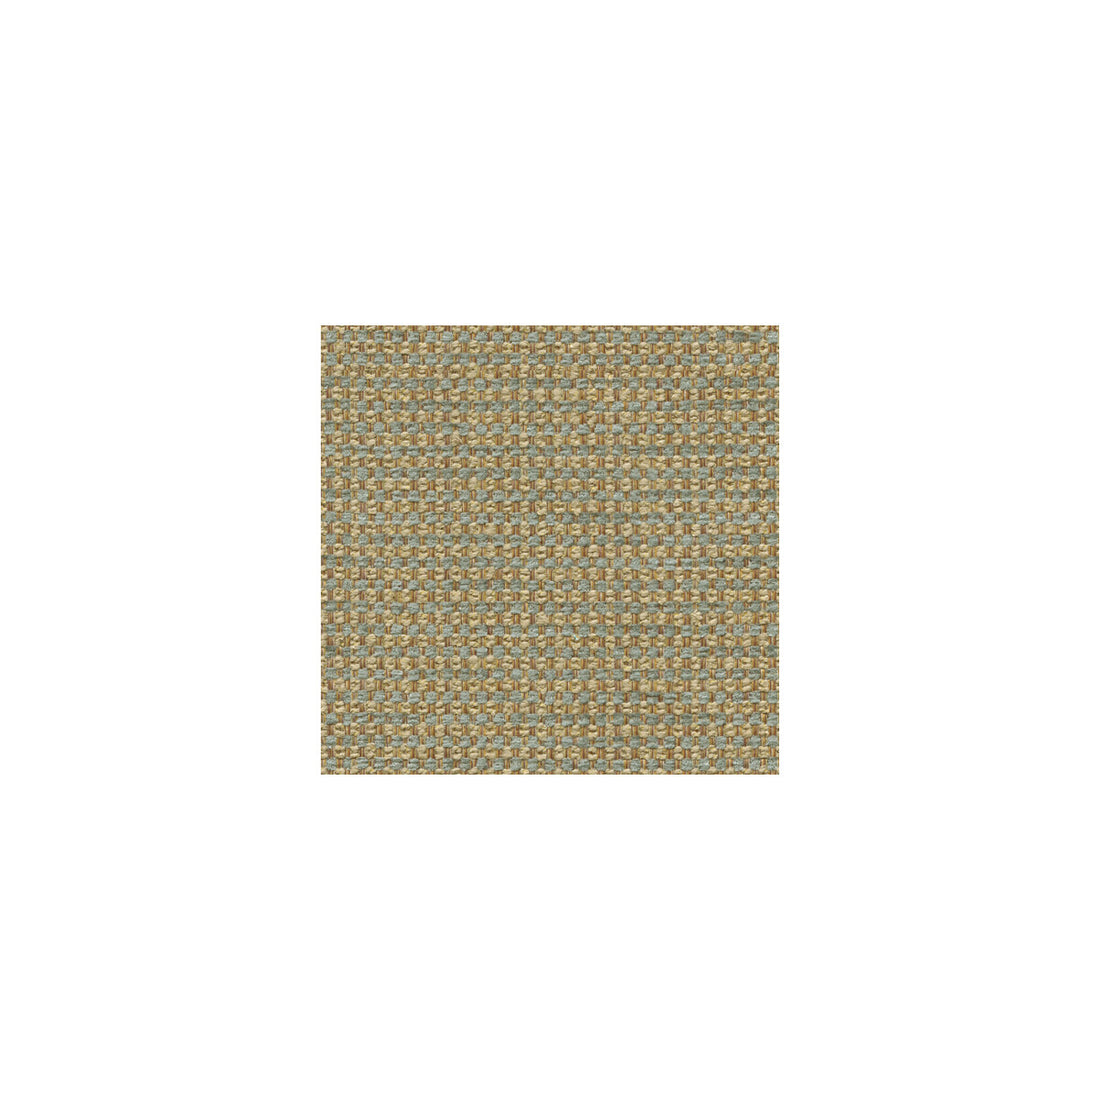 Kravet Smart fabric in 28767-1611 color - pattern 28767.1611.0 - by Kravet Smart in the Gis collection